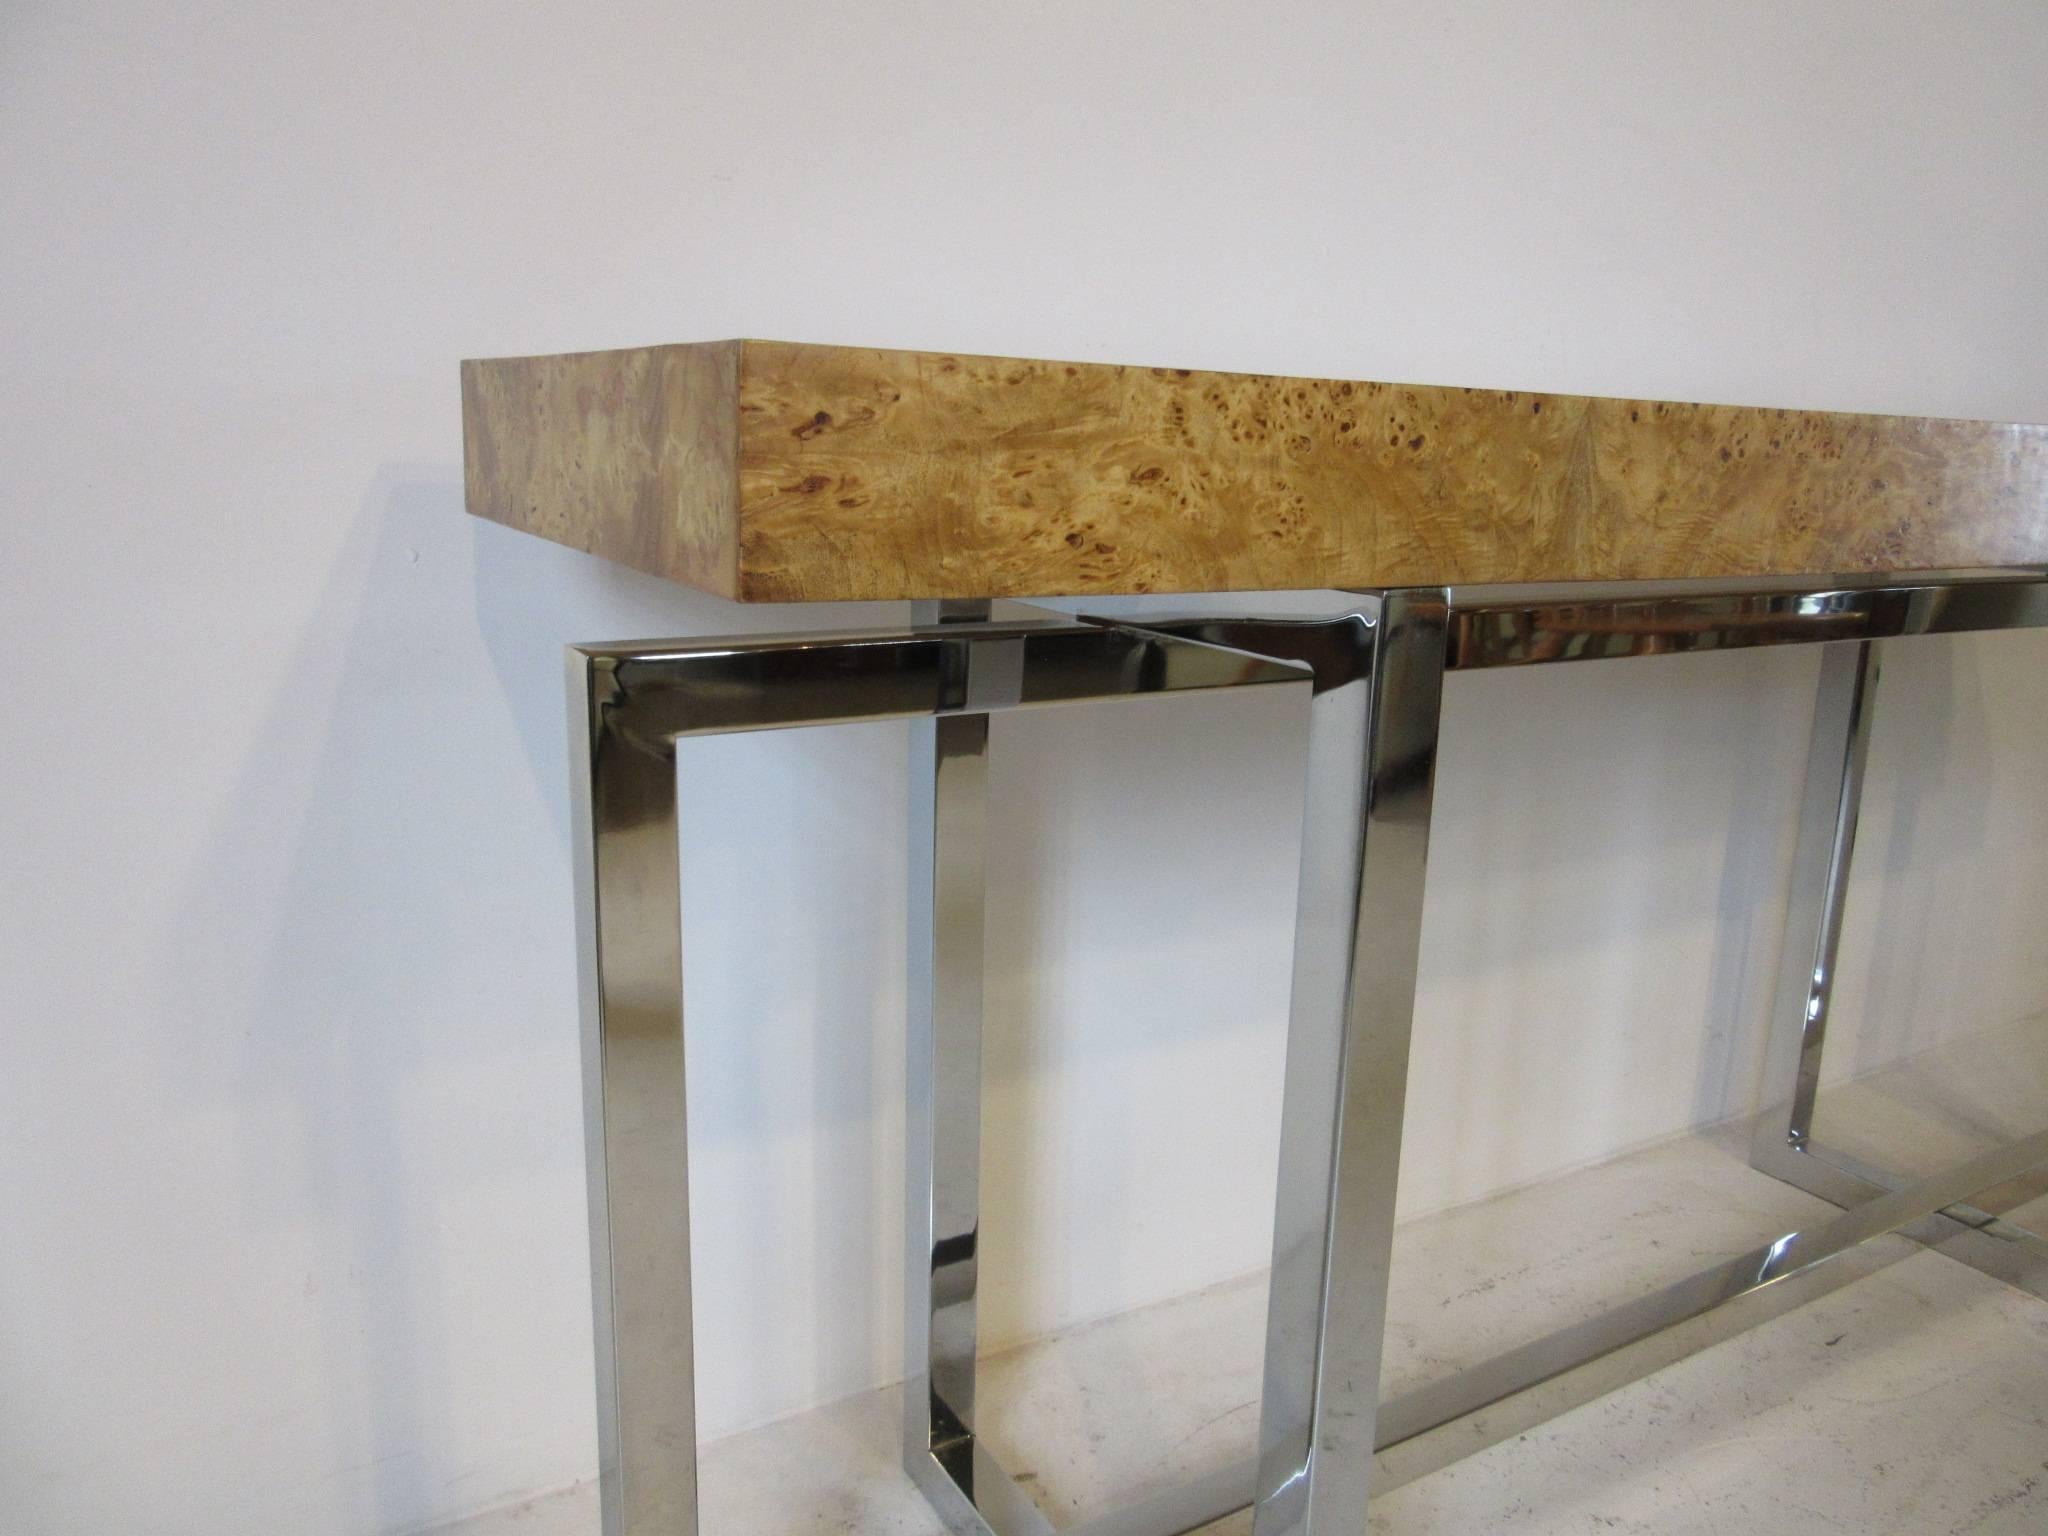 A chromed square tubed based console or sofa table with olivewood burl top ,the perfect size for that hard to fit location.